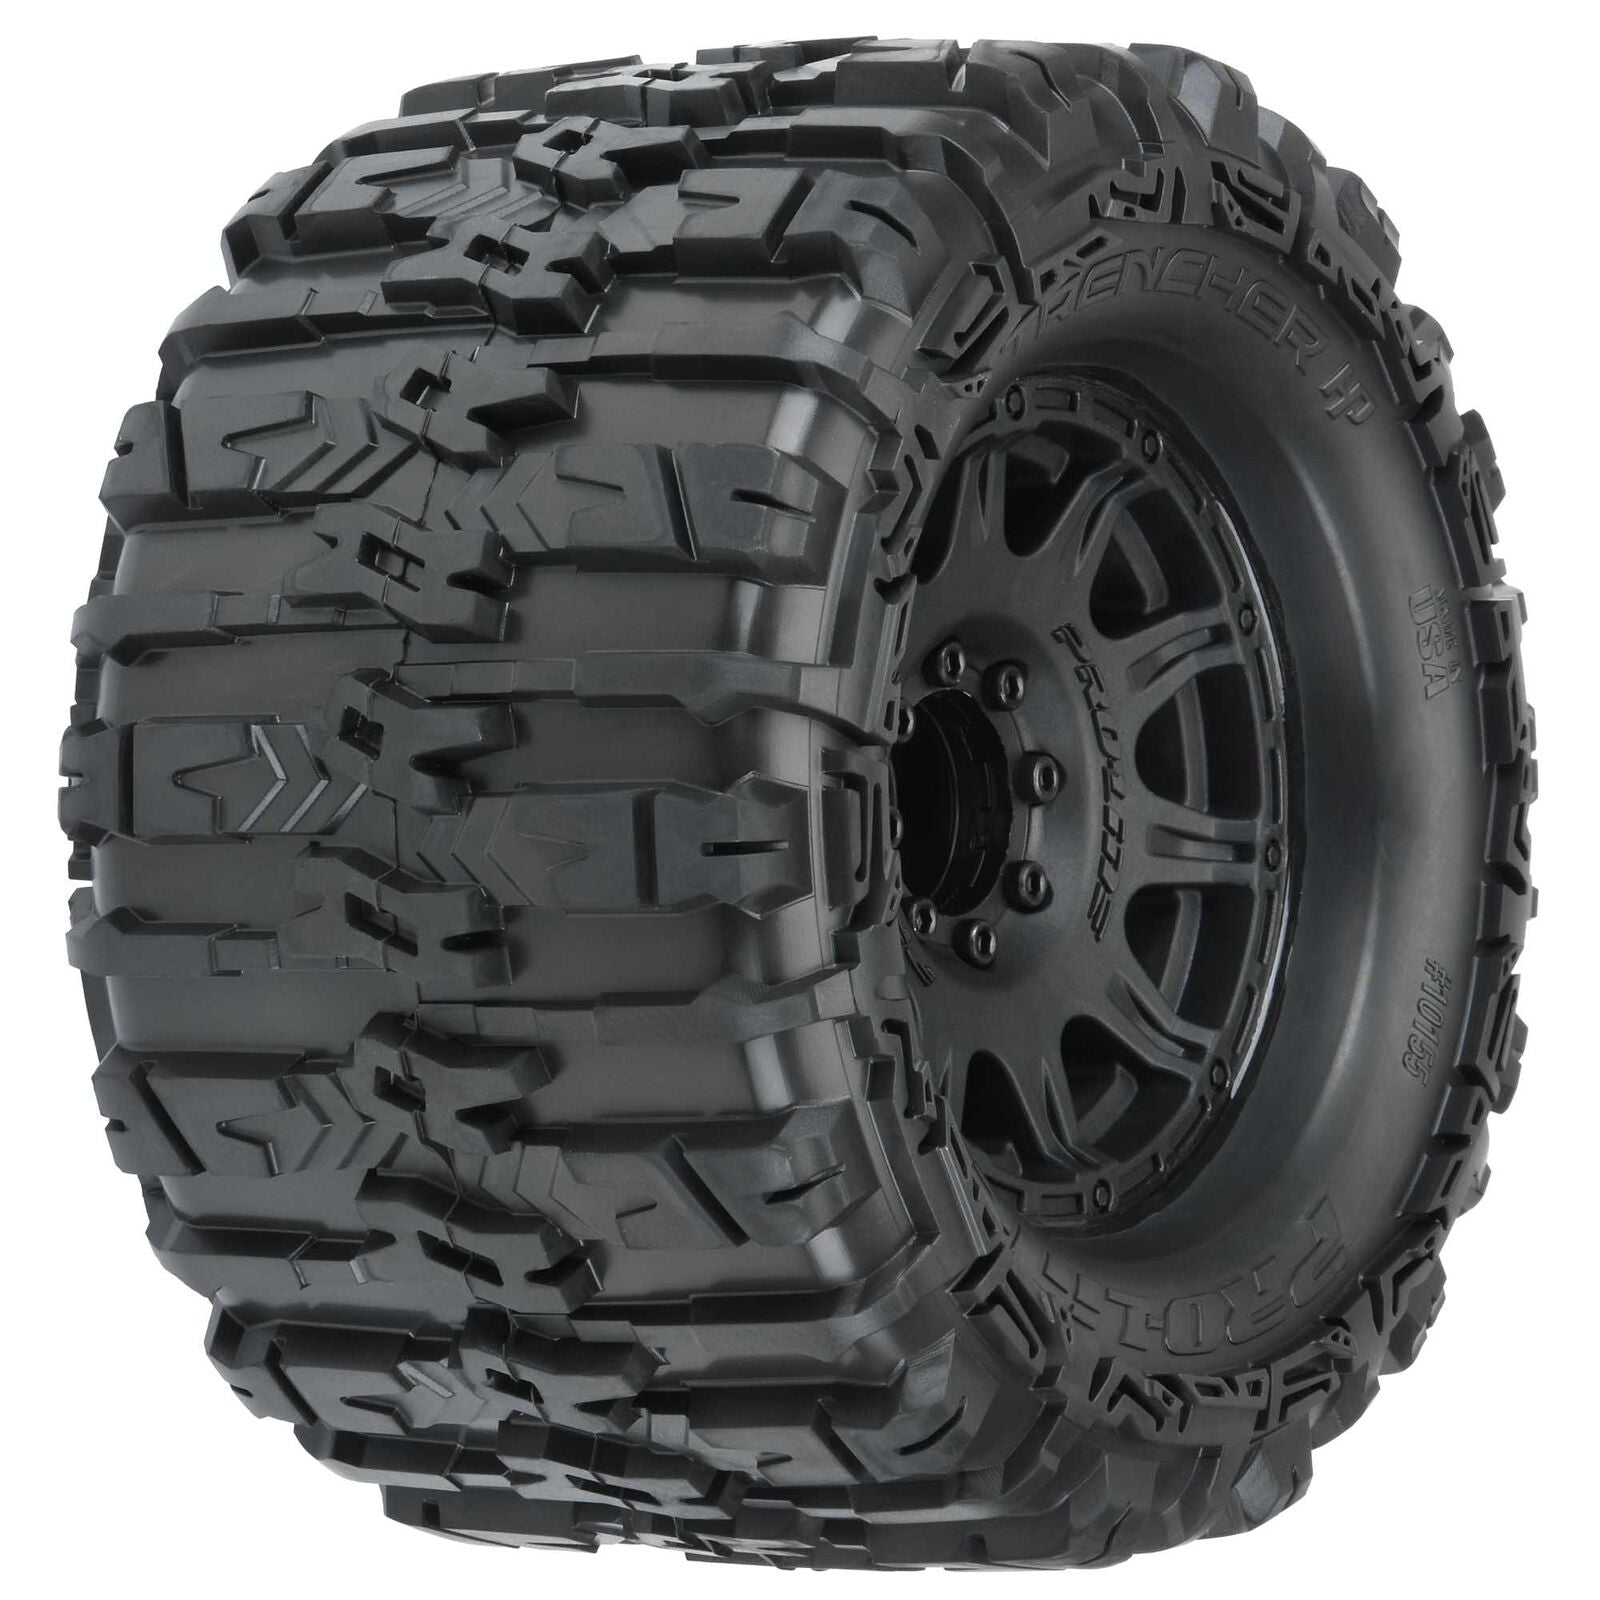 PROLINE 10155-10 Trencher HP 3.8" Belted MT Tires, Raid Black Mounted 8x32 17mm Hex